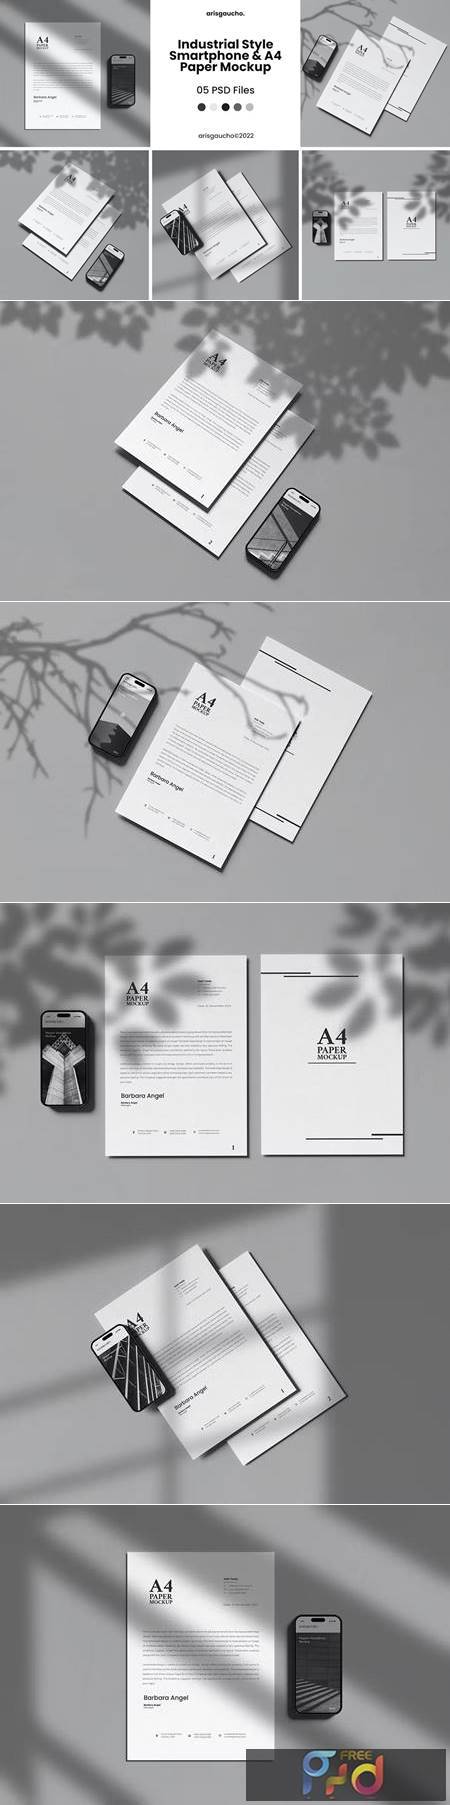 FreePsdVn.com 2301157 MOCKUP industrial style smartphone and a4 paper mockup yz844cm